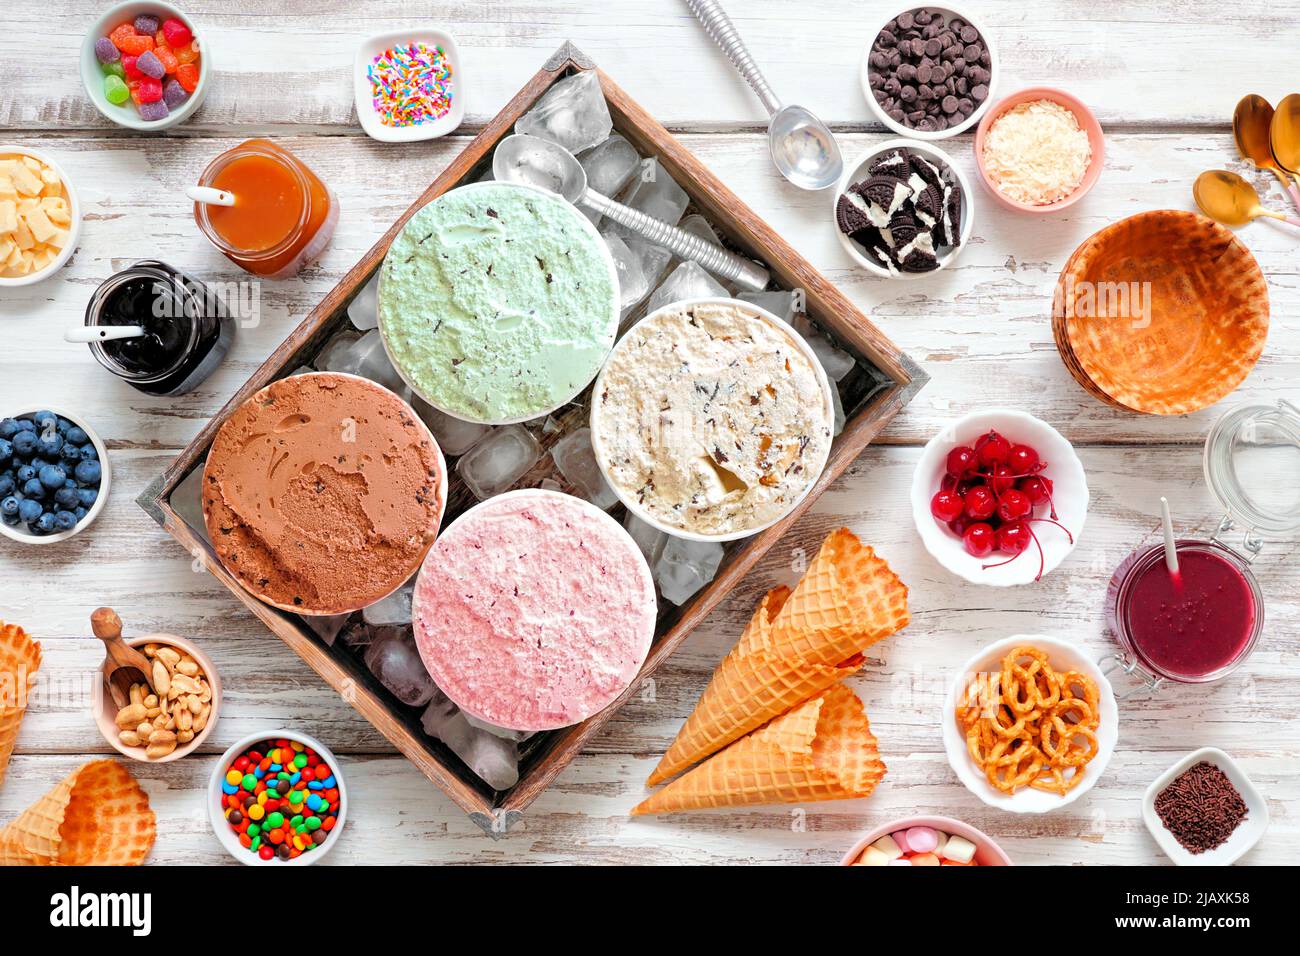 Summer ice cream buffet with a variety of ice cream flavors and sweet toppings. Overhead view table scene on a rustic white wood background. Stock Photo